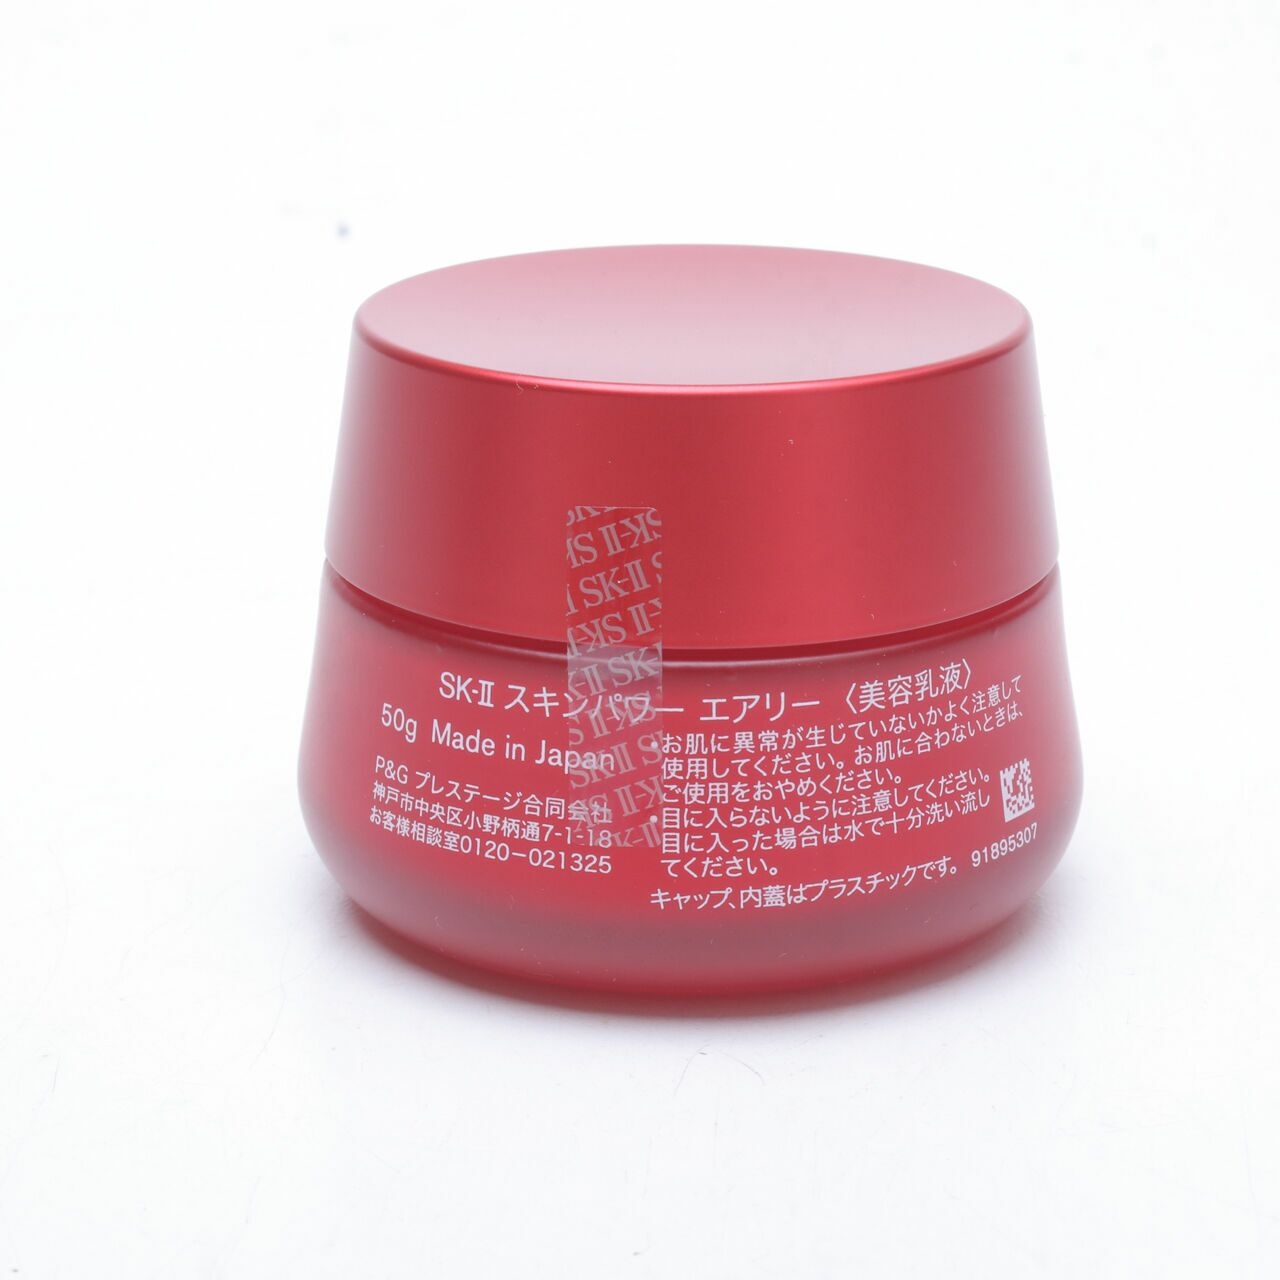 SK-II Skinpower Airy Milky Lotion Skin Care